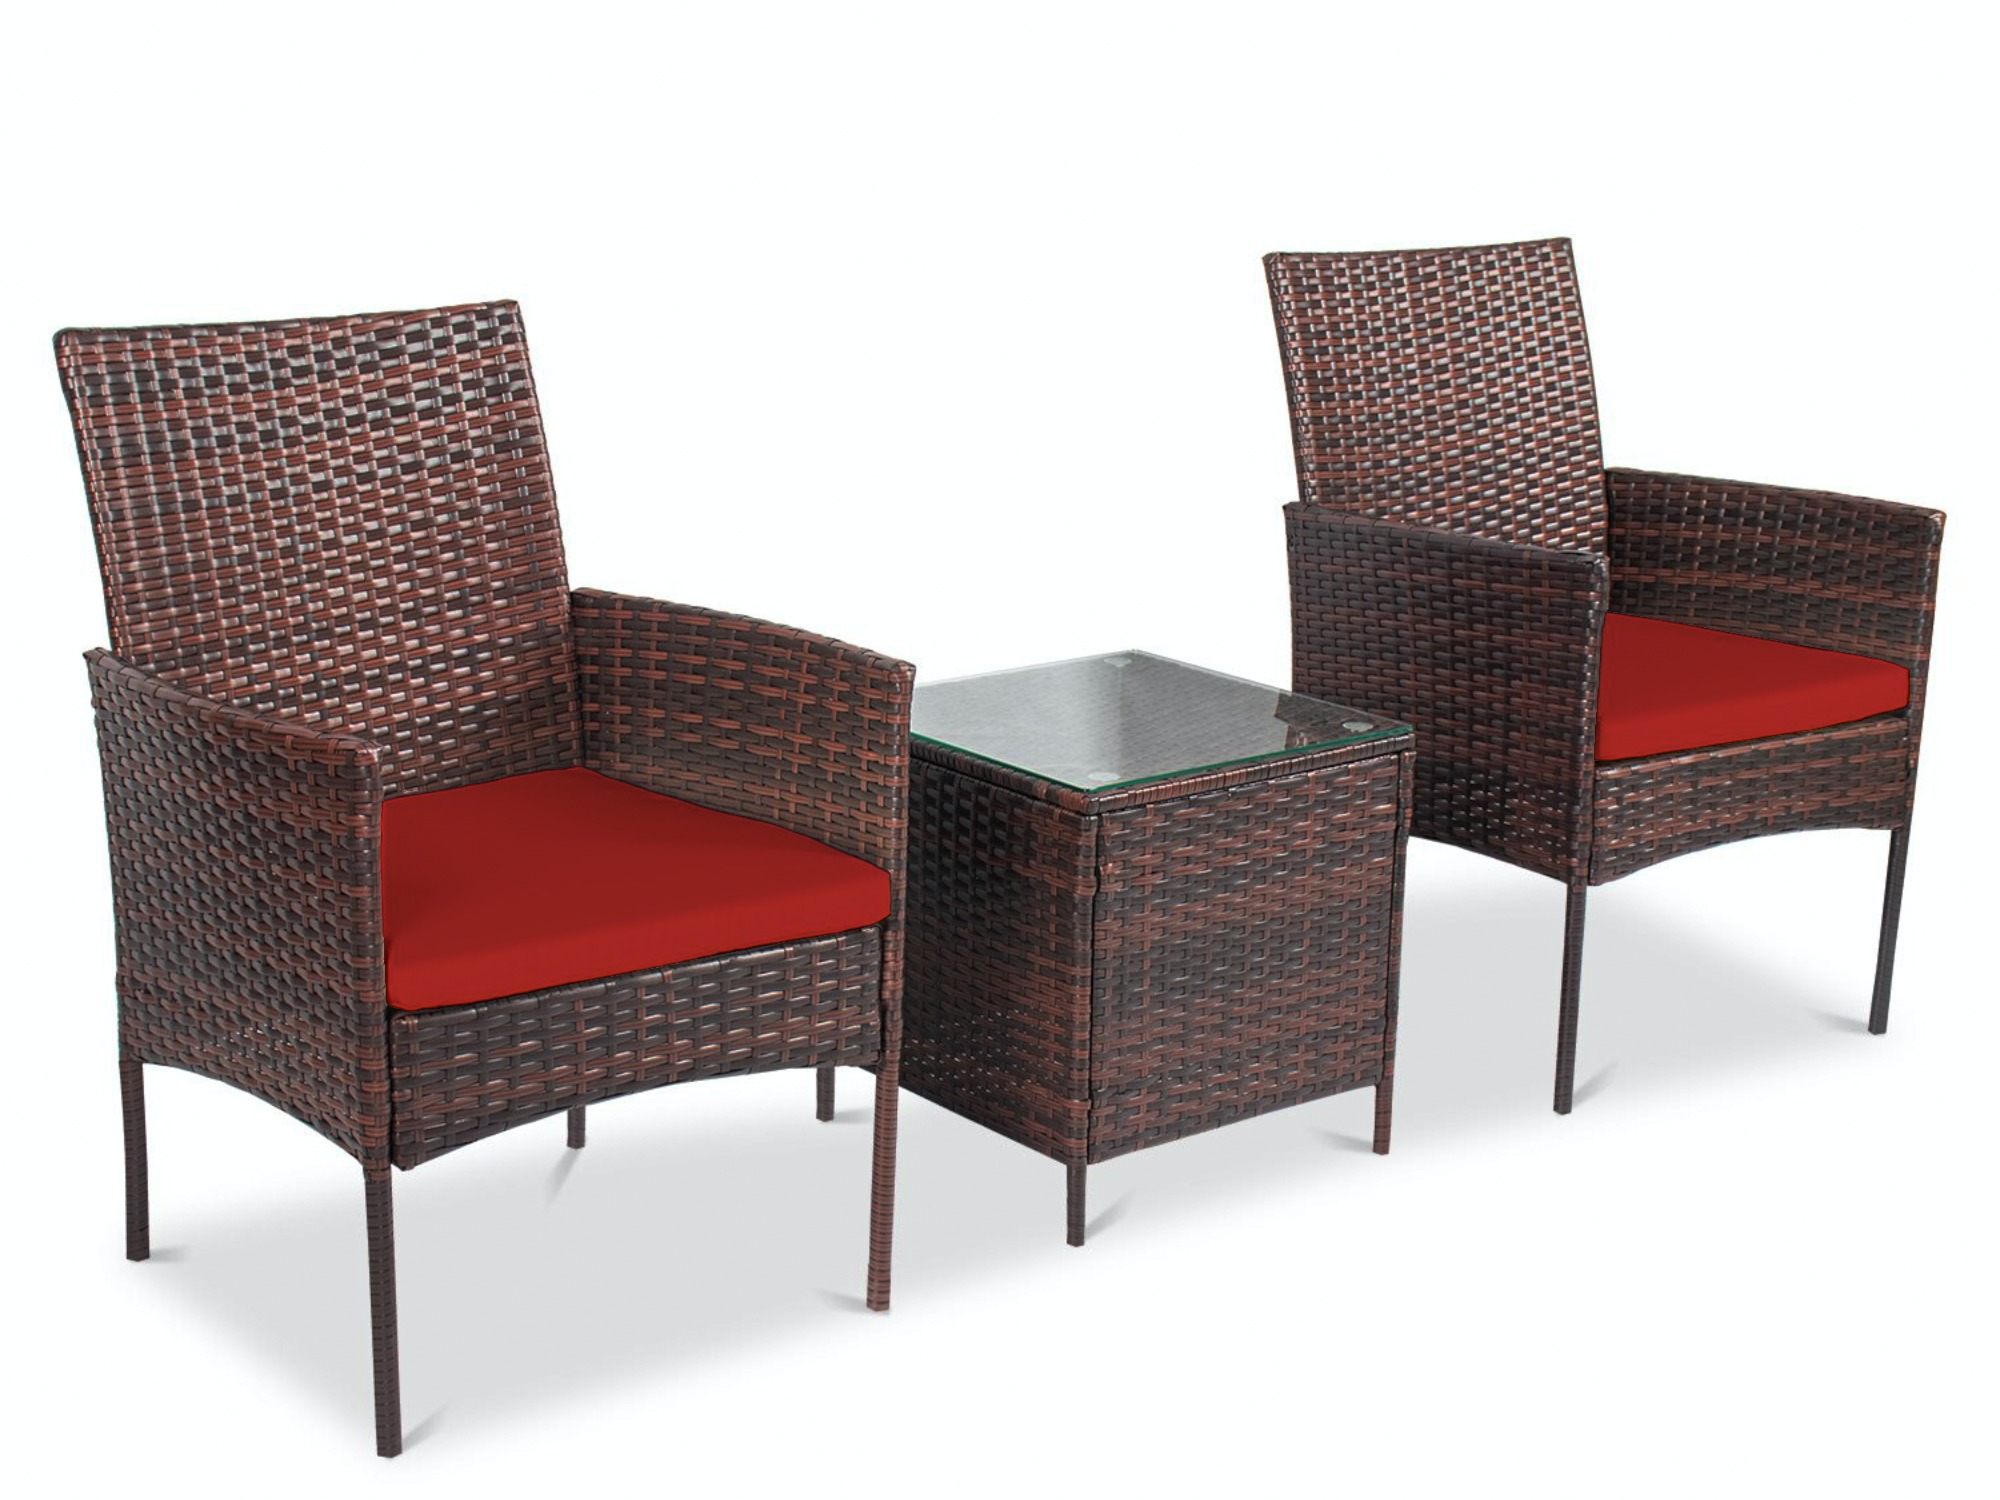 Grace 3 Piece Rattan Porch Patio Furniture Set – 2 Soft Cushion & Extra Comfort Chairs With a Beautiful Cafe Table - Red - image 1 of 10